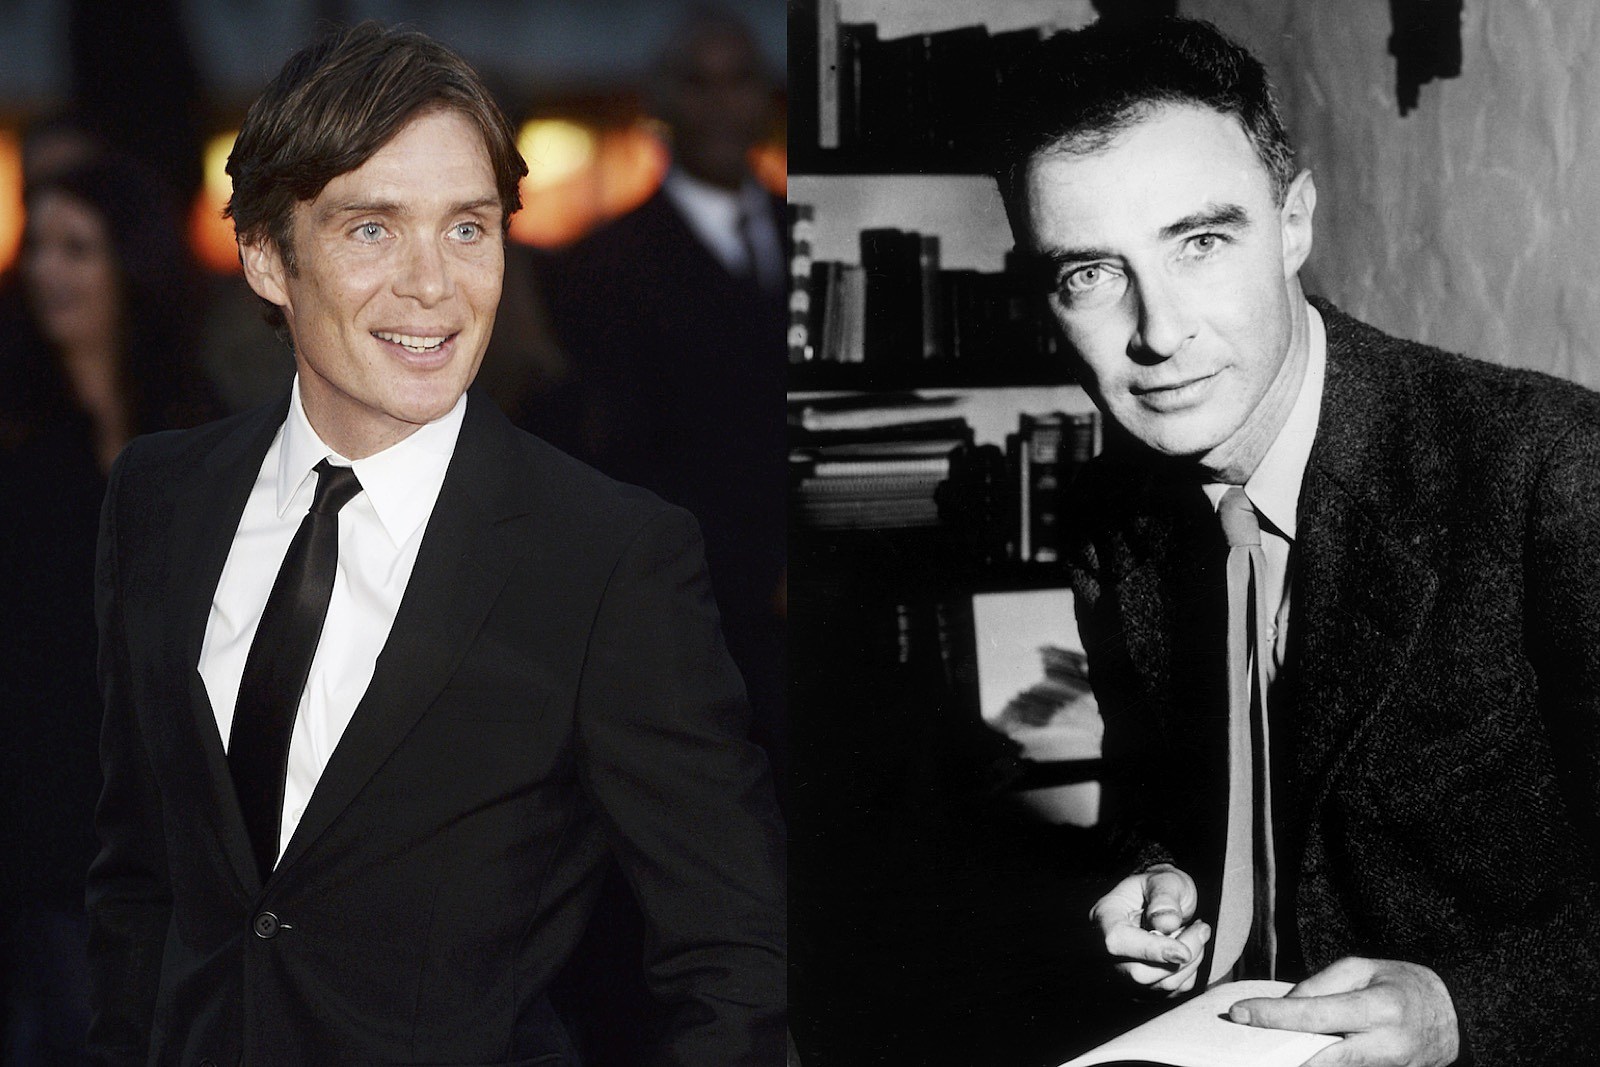 the Dark Knight' Cast Then and Now: Cillian Murphy, Christian Bale